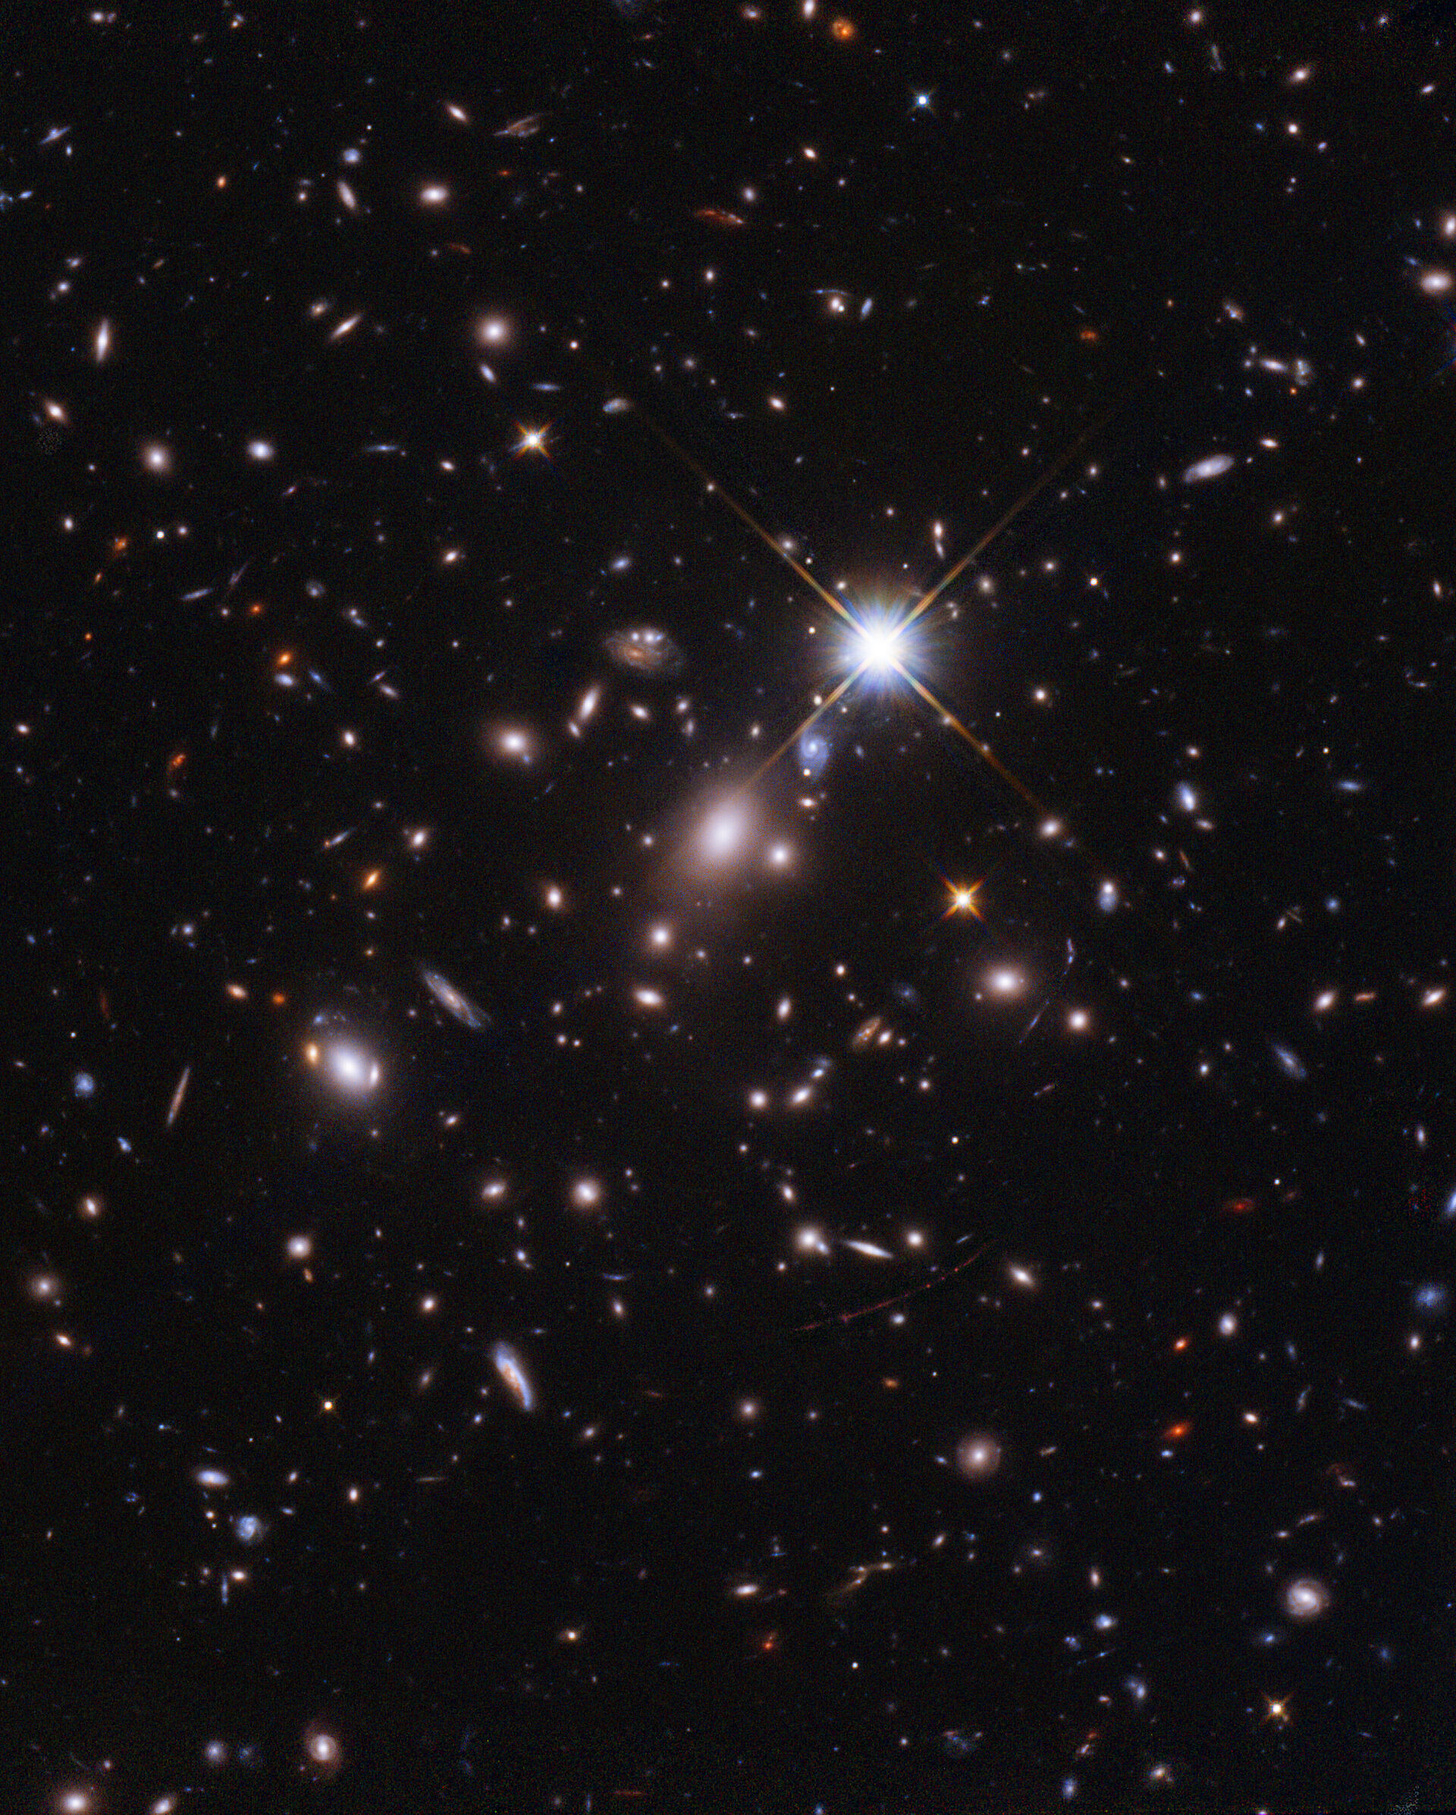 A record broken: Hubble finds the most distant star ever seen